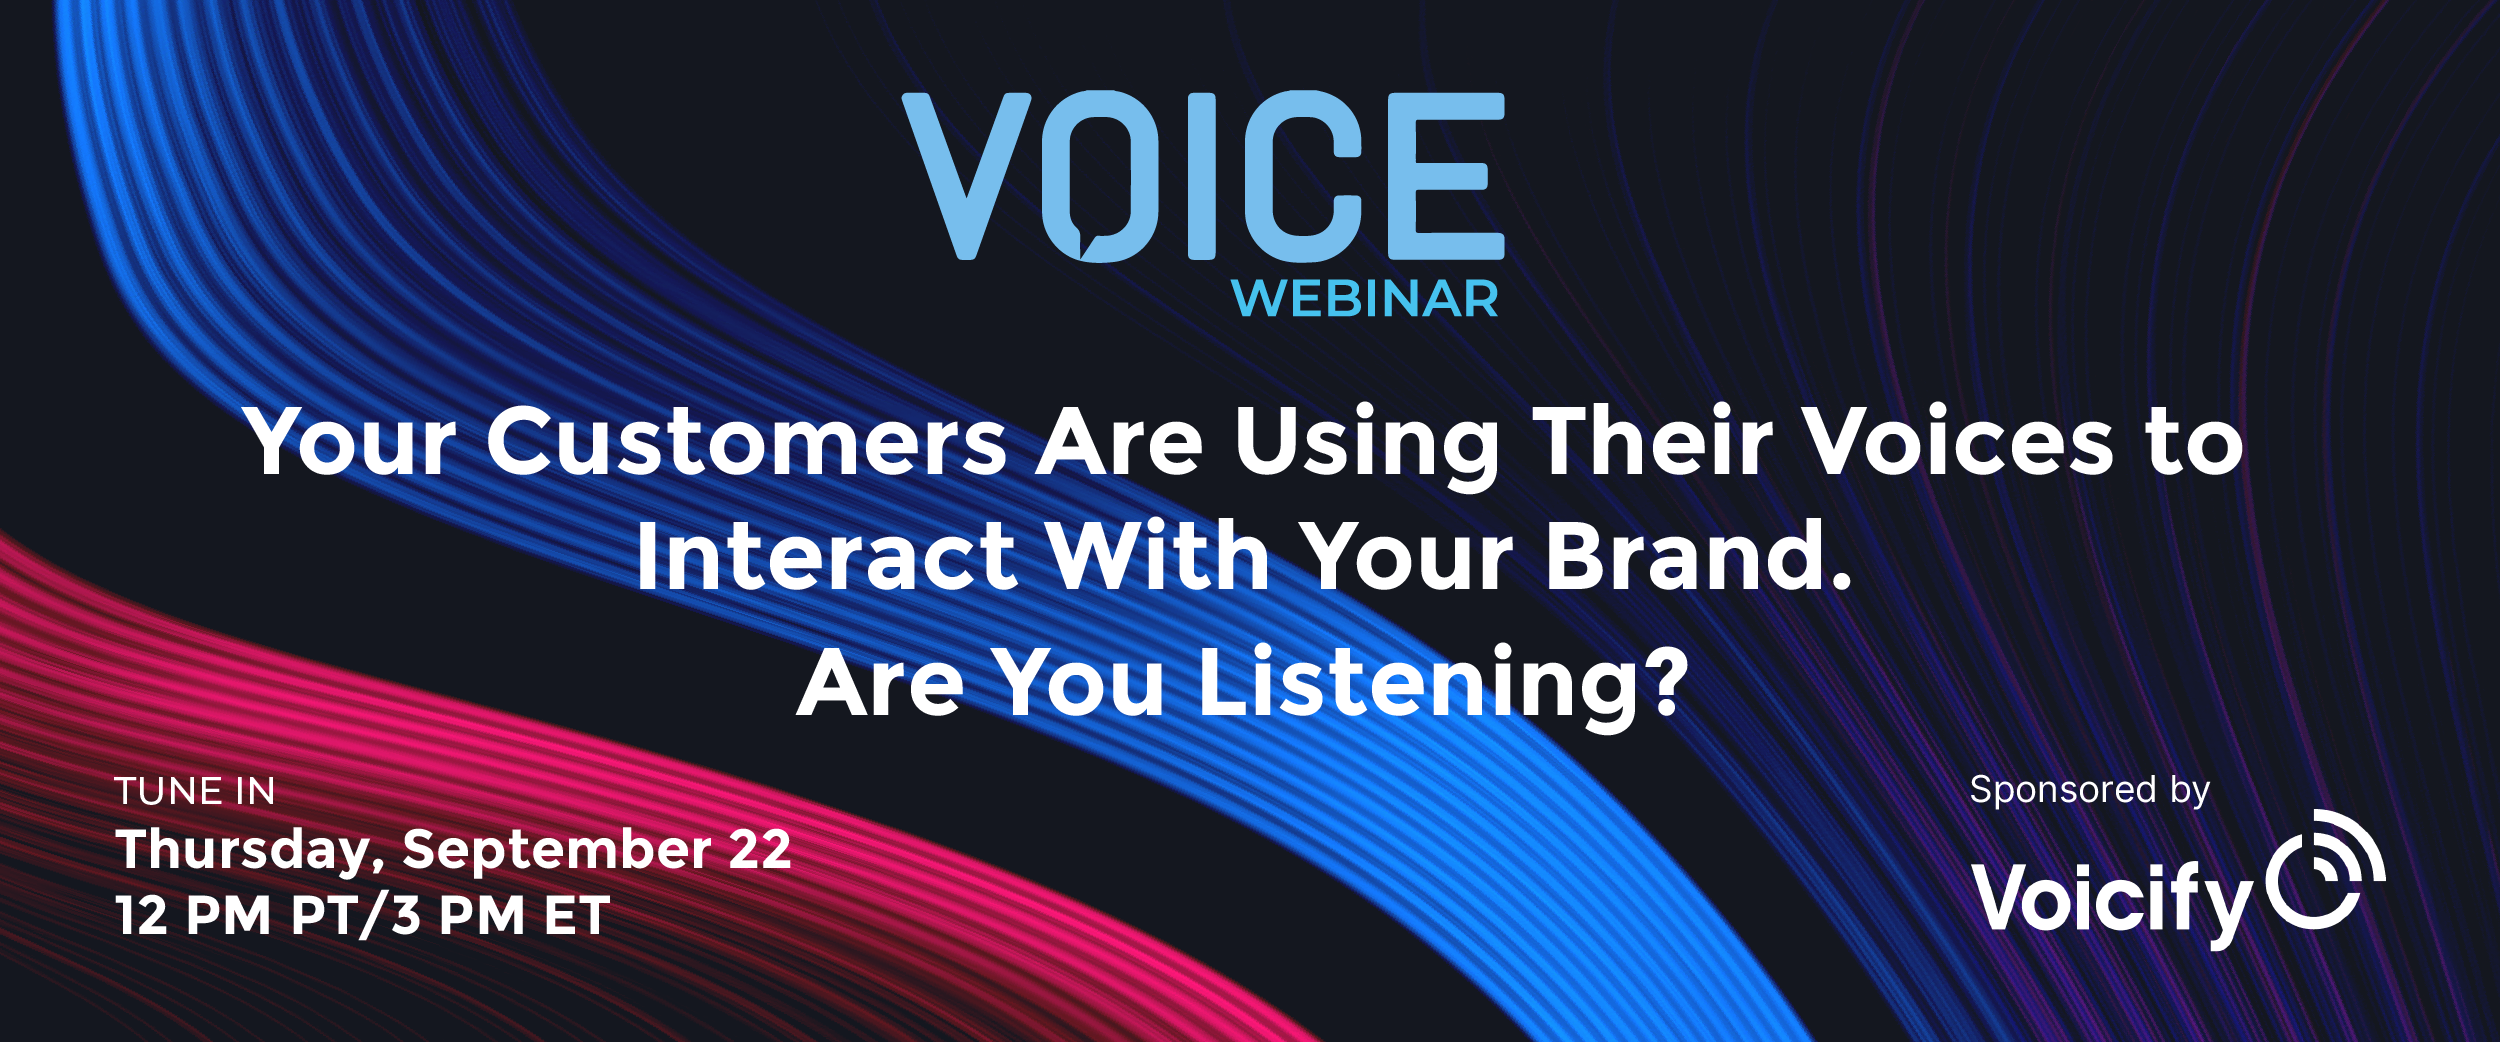 VOICE22 - Talking About Contact Center Operations